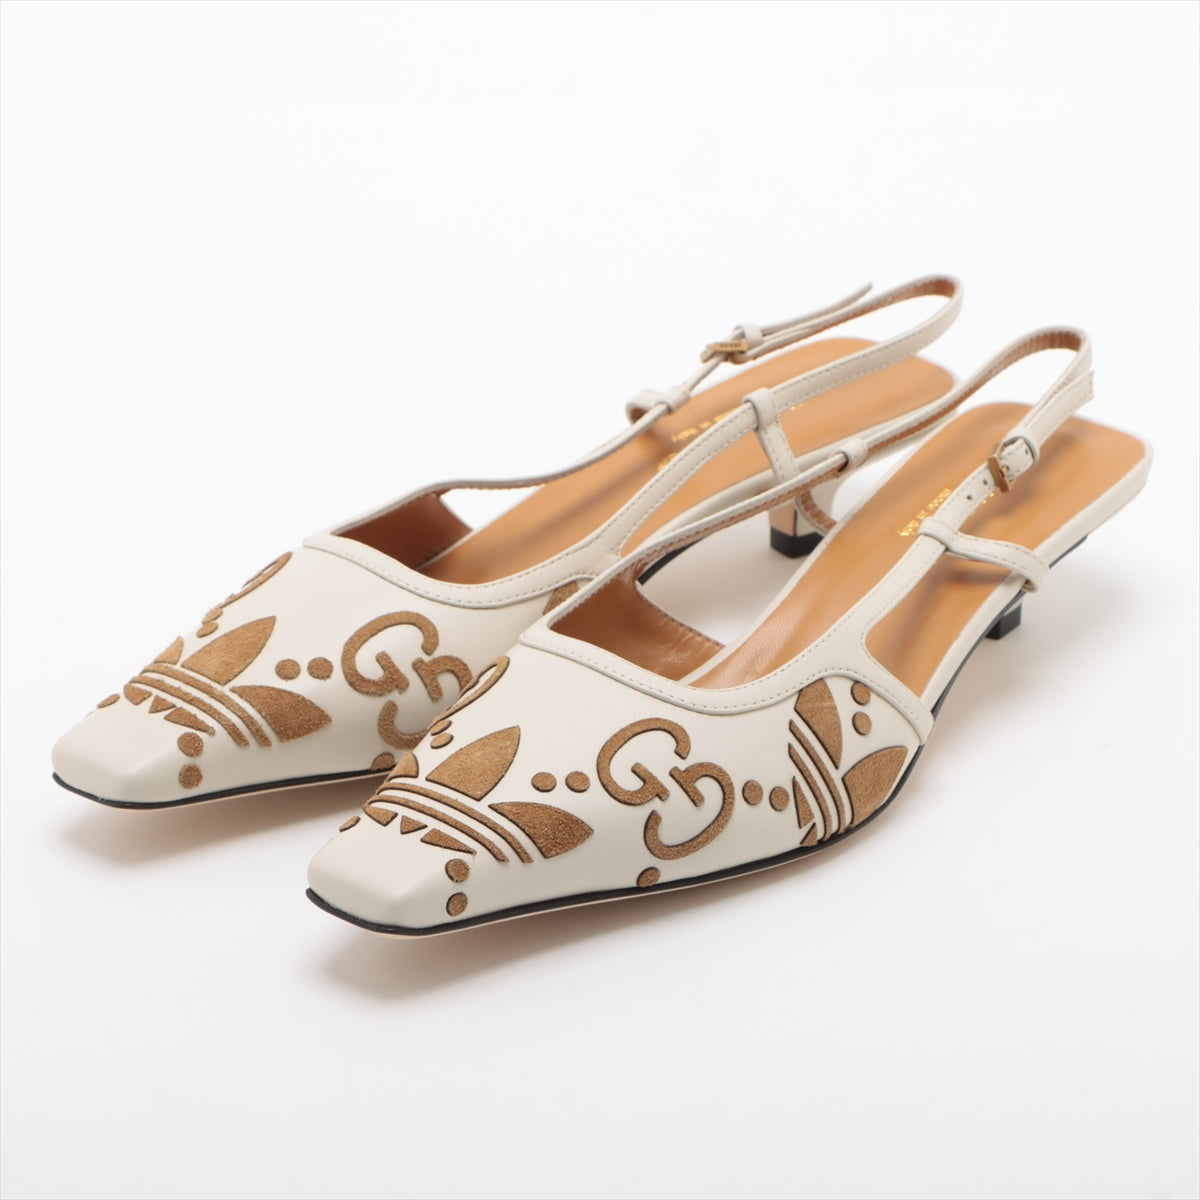 Gucci x adidas Leather Strap Pumps 36 1/2 Ladies' Ivory x brown slingback box sack Replacement lift available